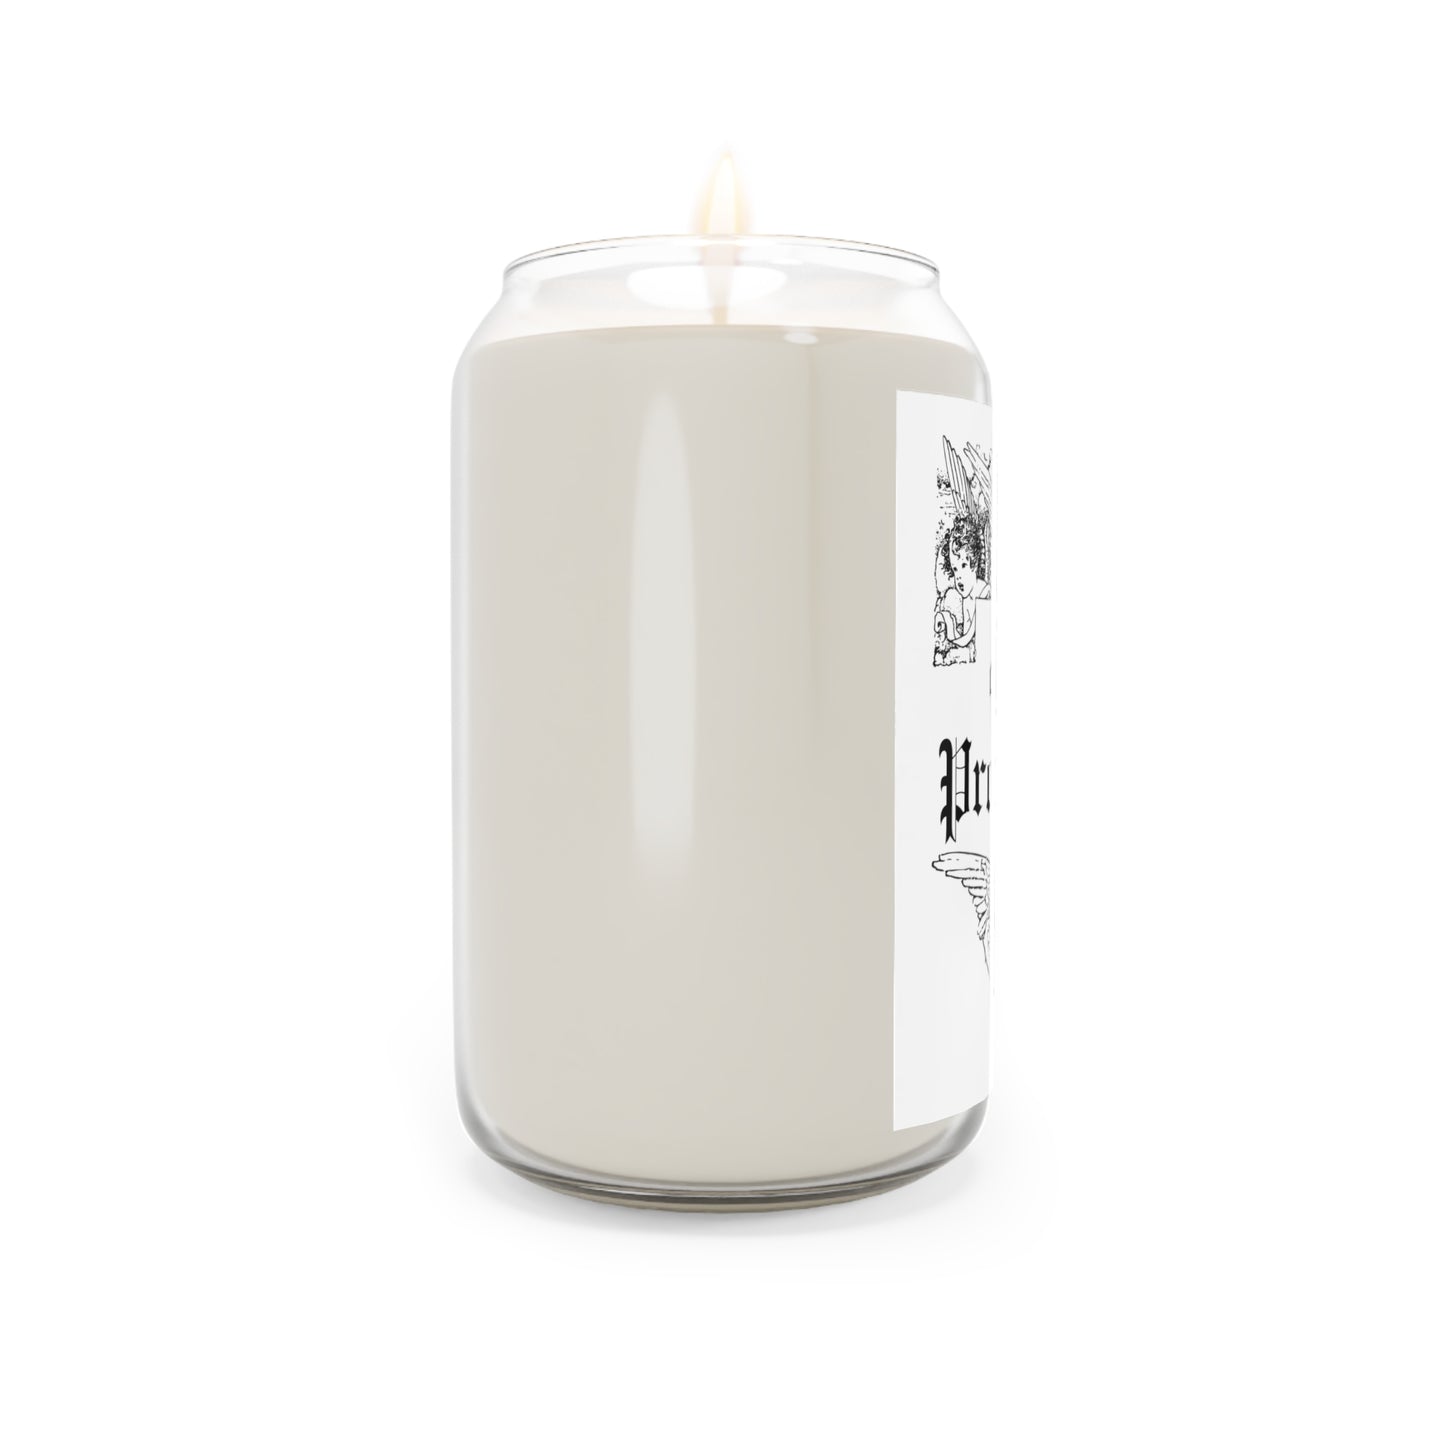 444 Angel Number Scented Candle, 13.75oz